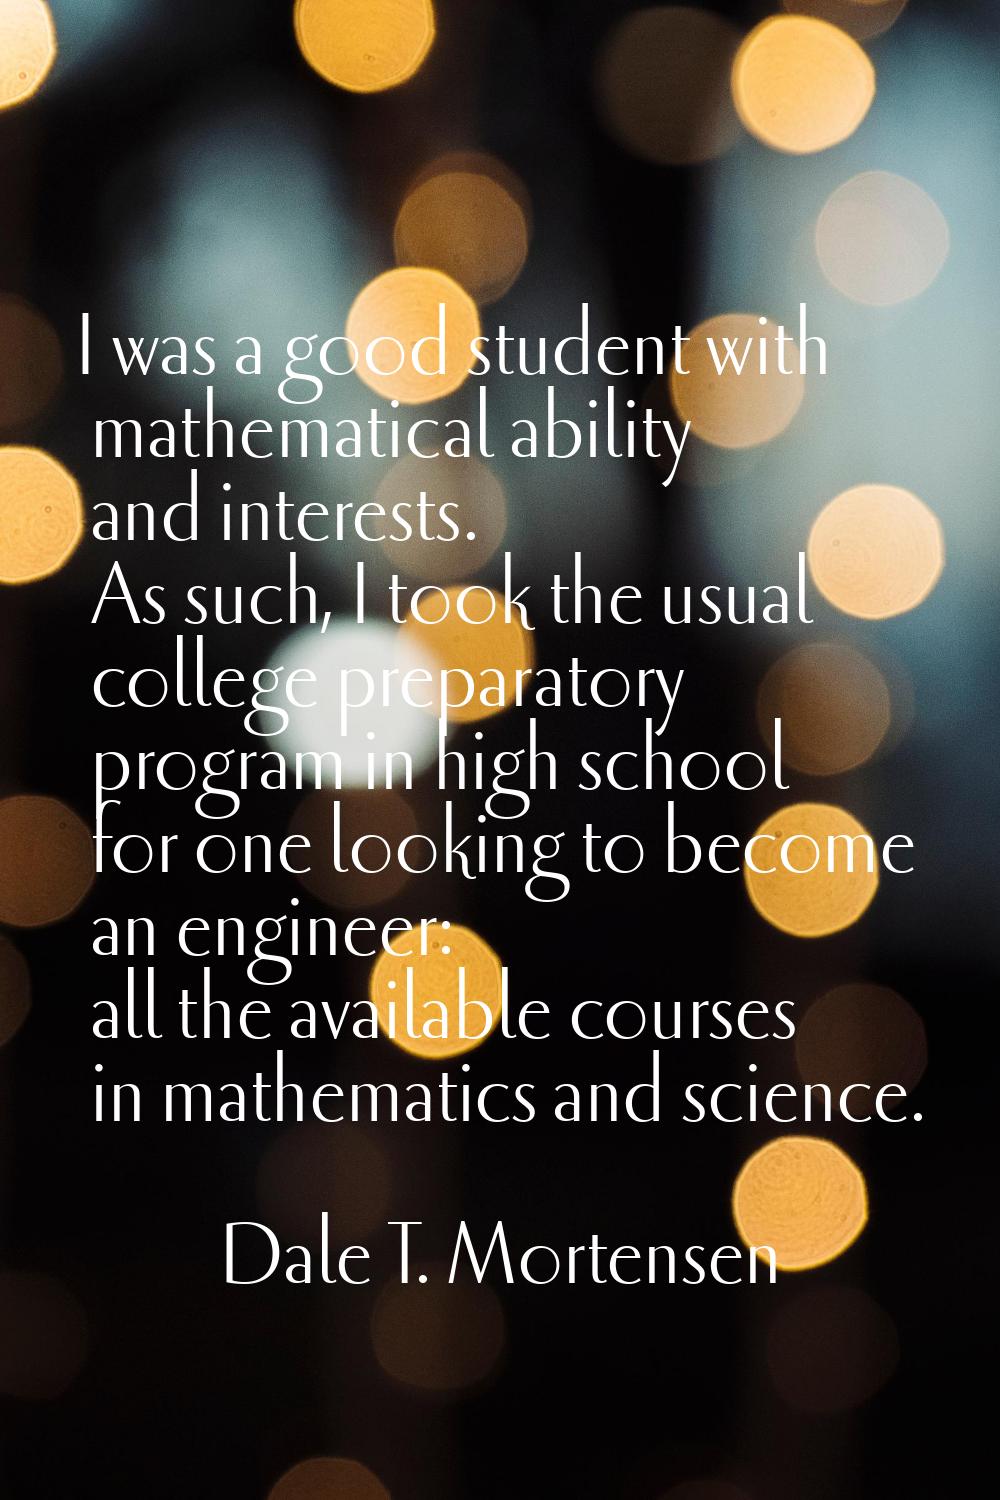 I was a good student with mathematical ability and interests. As such, I took the usual college pre